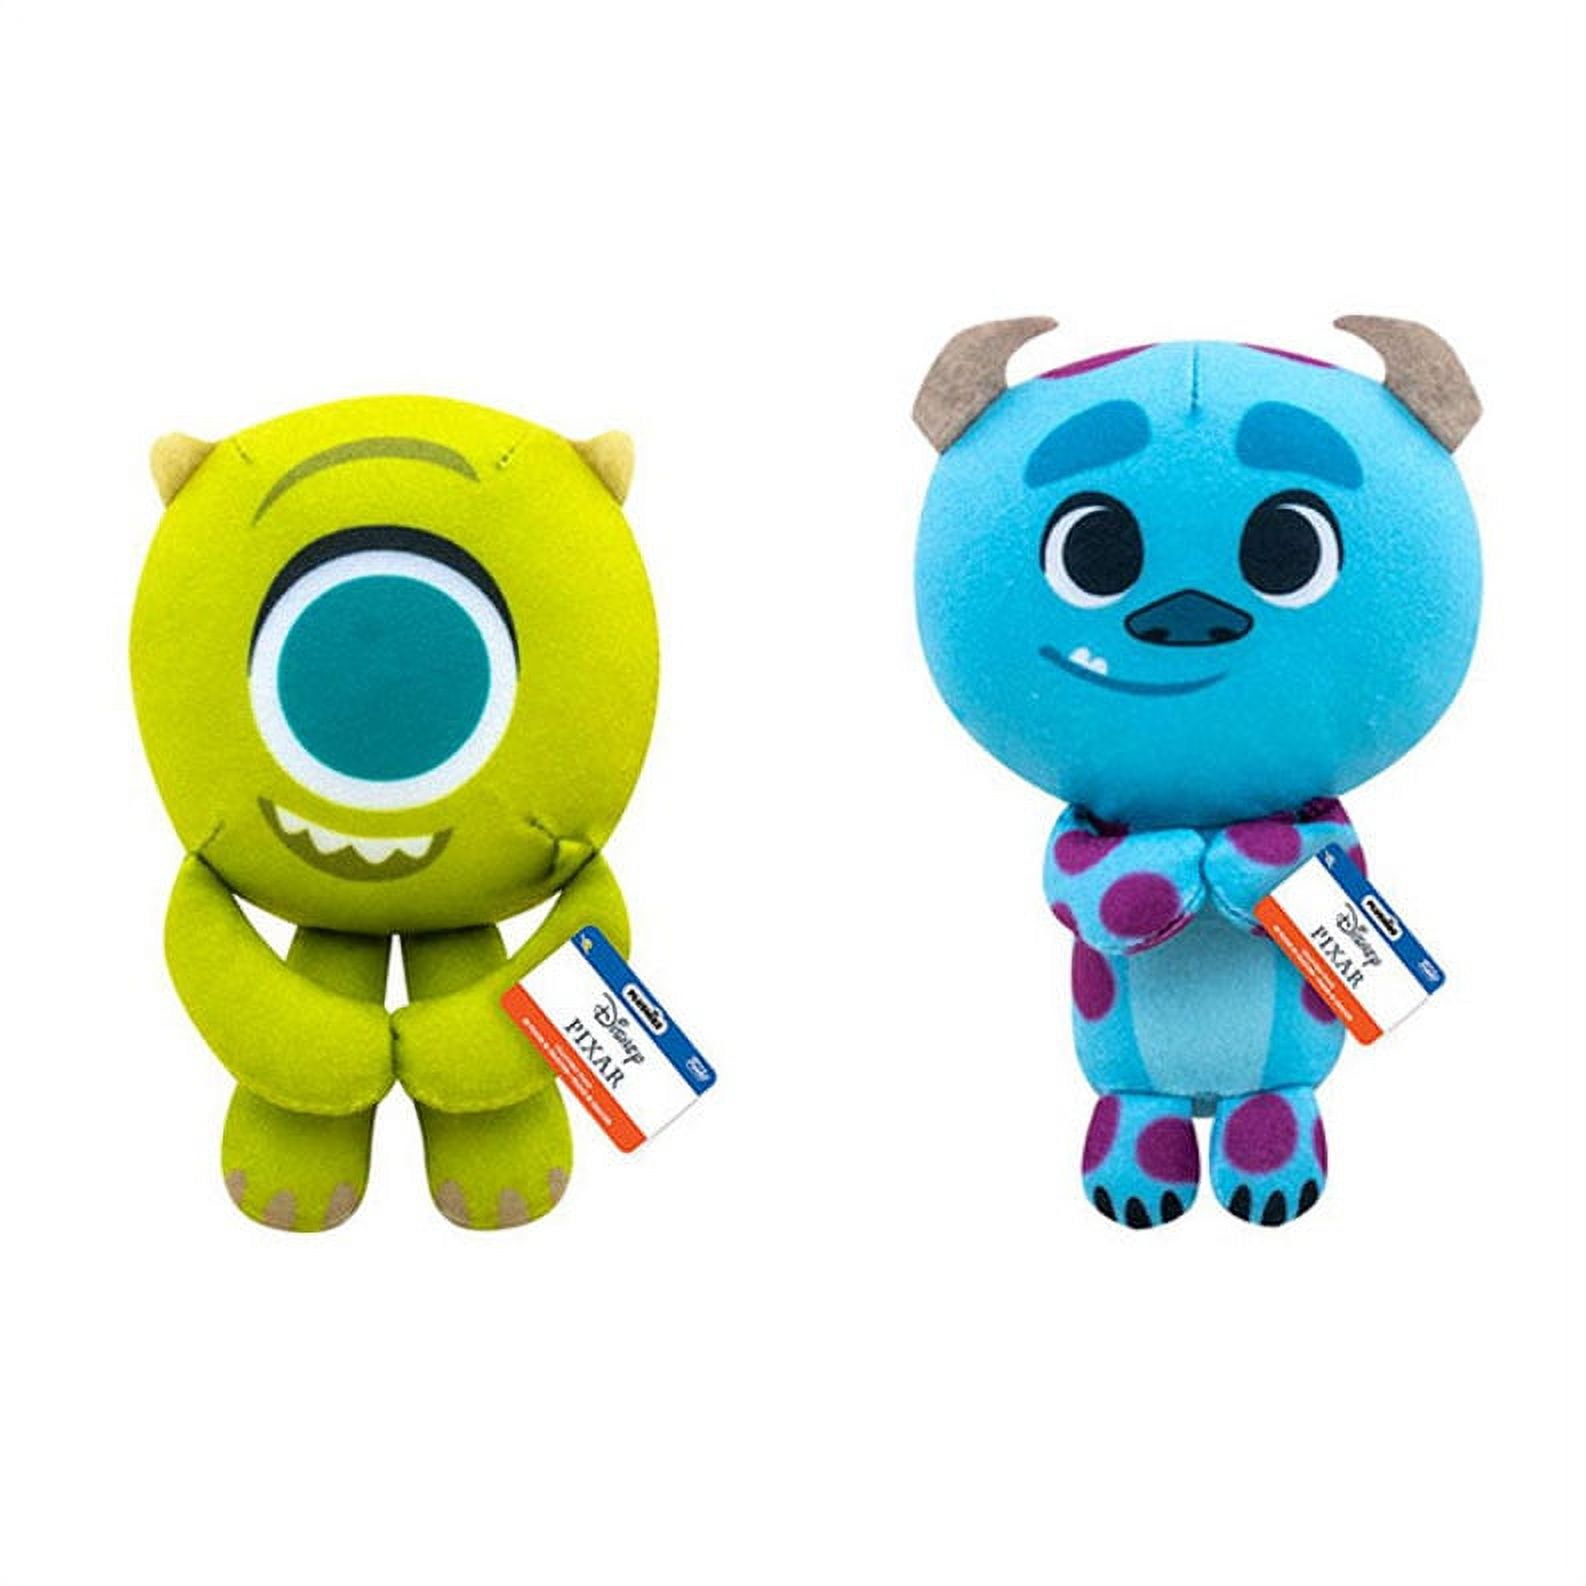 Pop! Minis Disney - Sulley and Mike 2 Pack - figurine 009 Pocket